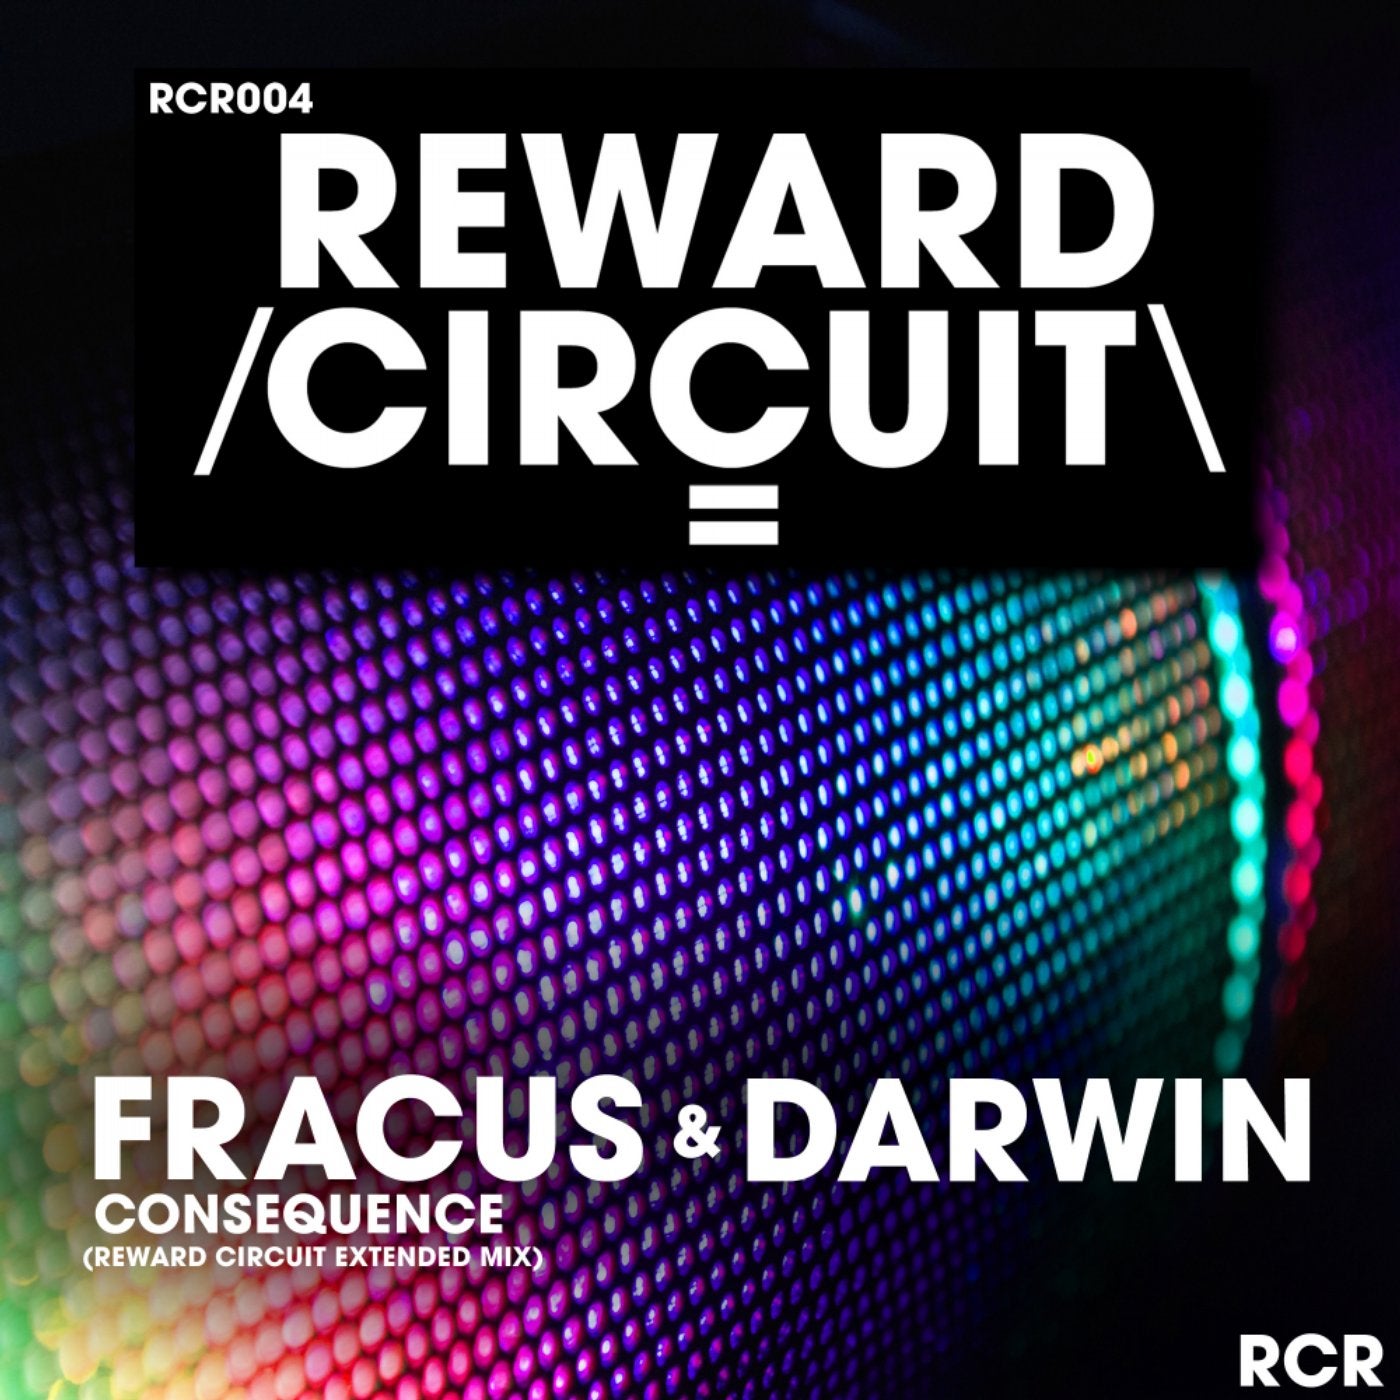 Consequence ((Reward Circuit Extended Mix))